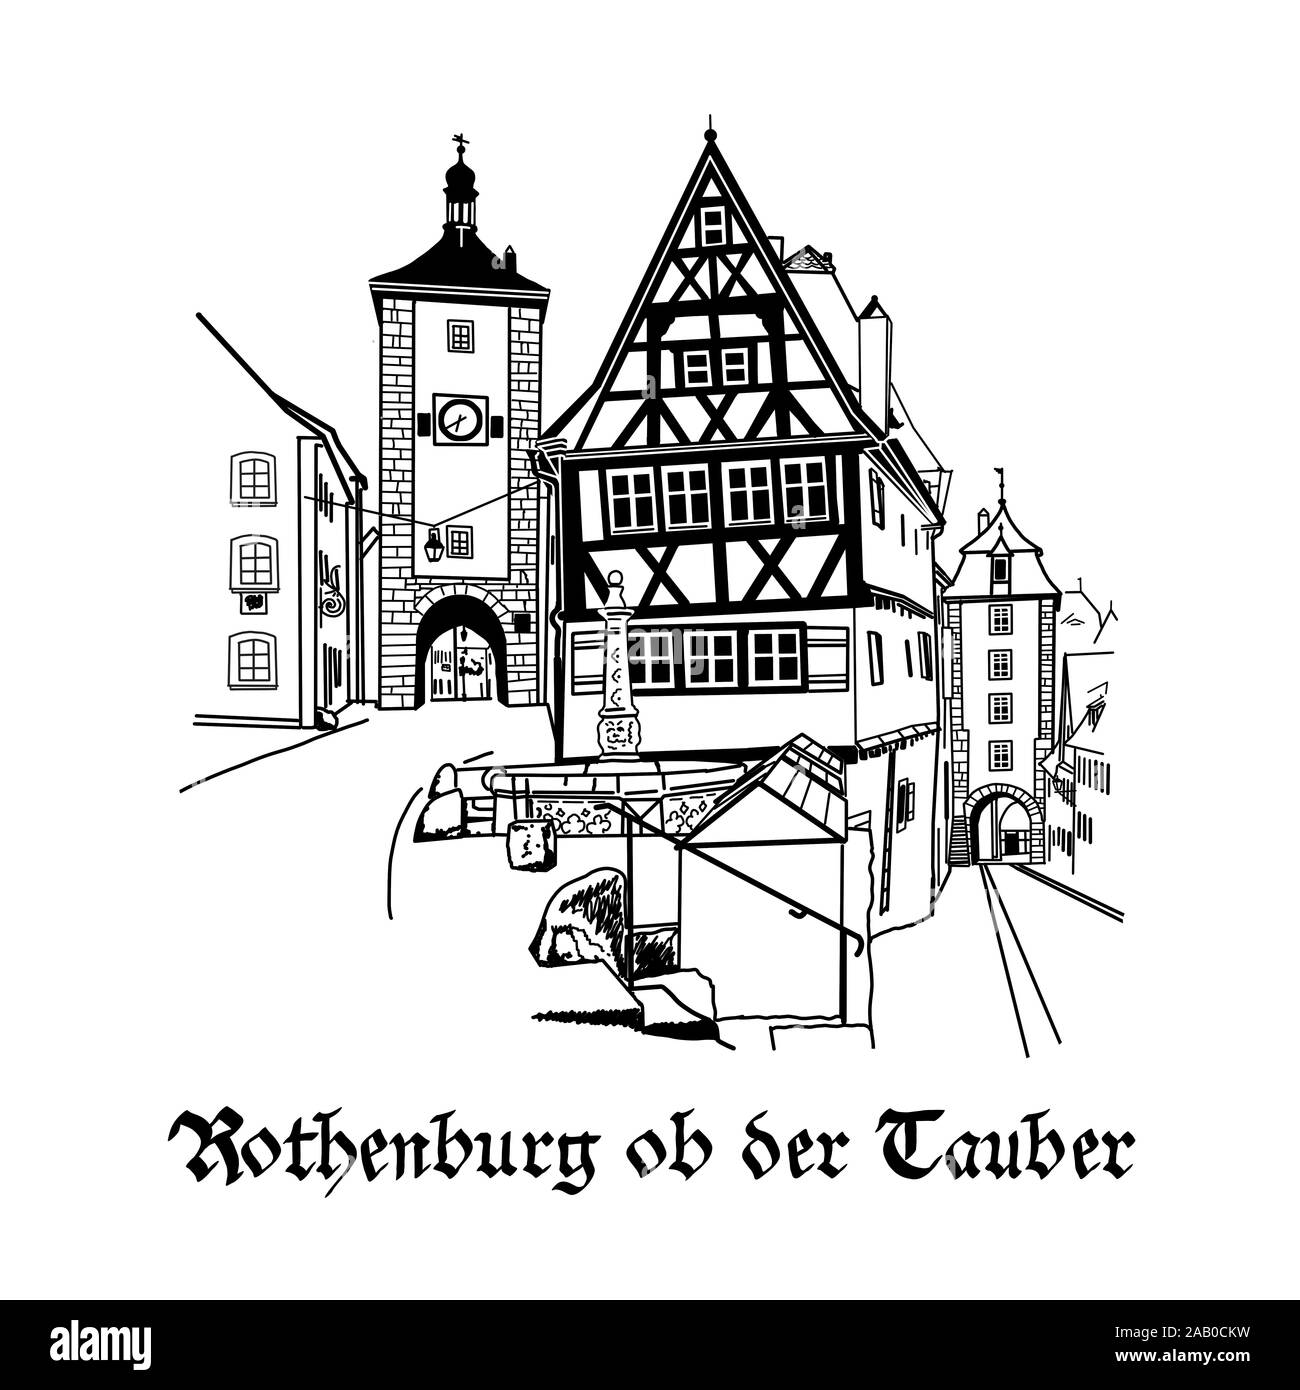 Rothenburg town square Cut Out Stock Images & Pictures - Alamy